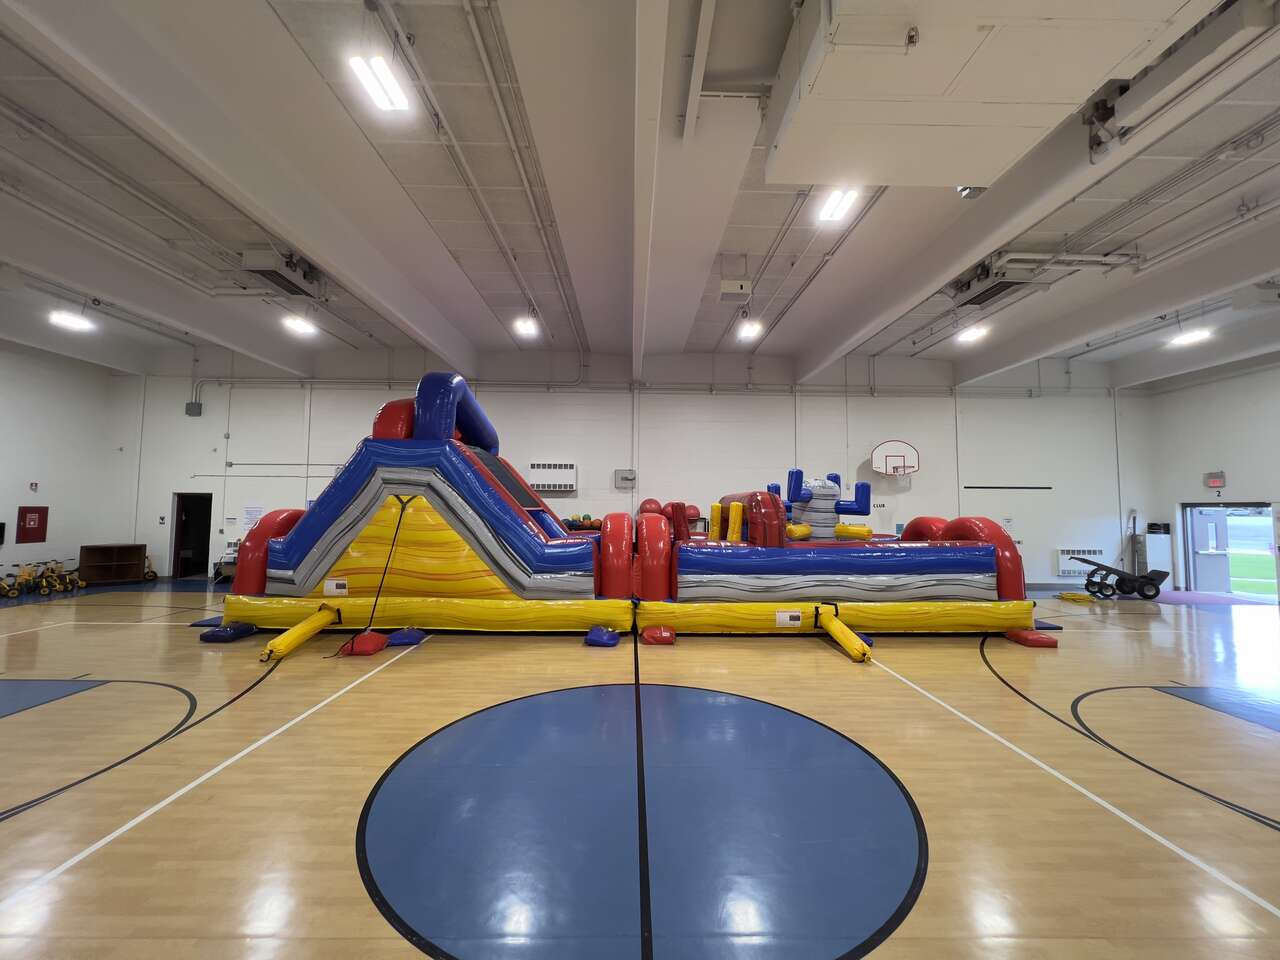 obstacles courses, from Fun Bounces Rental in Sheridan, IL 60551